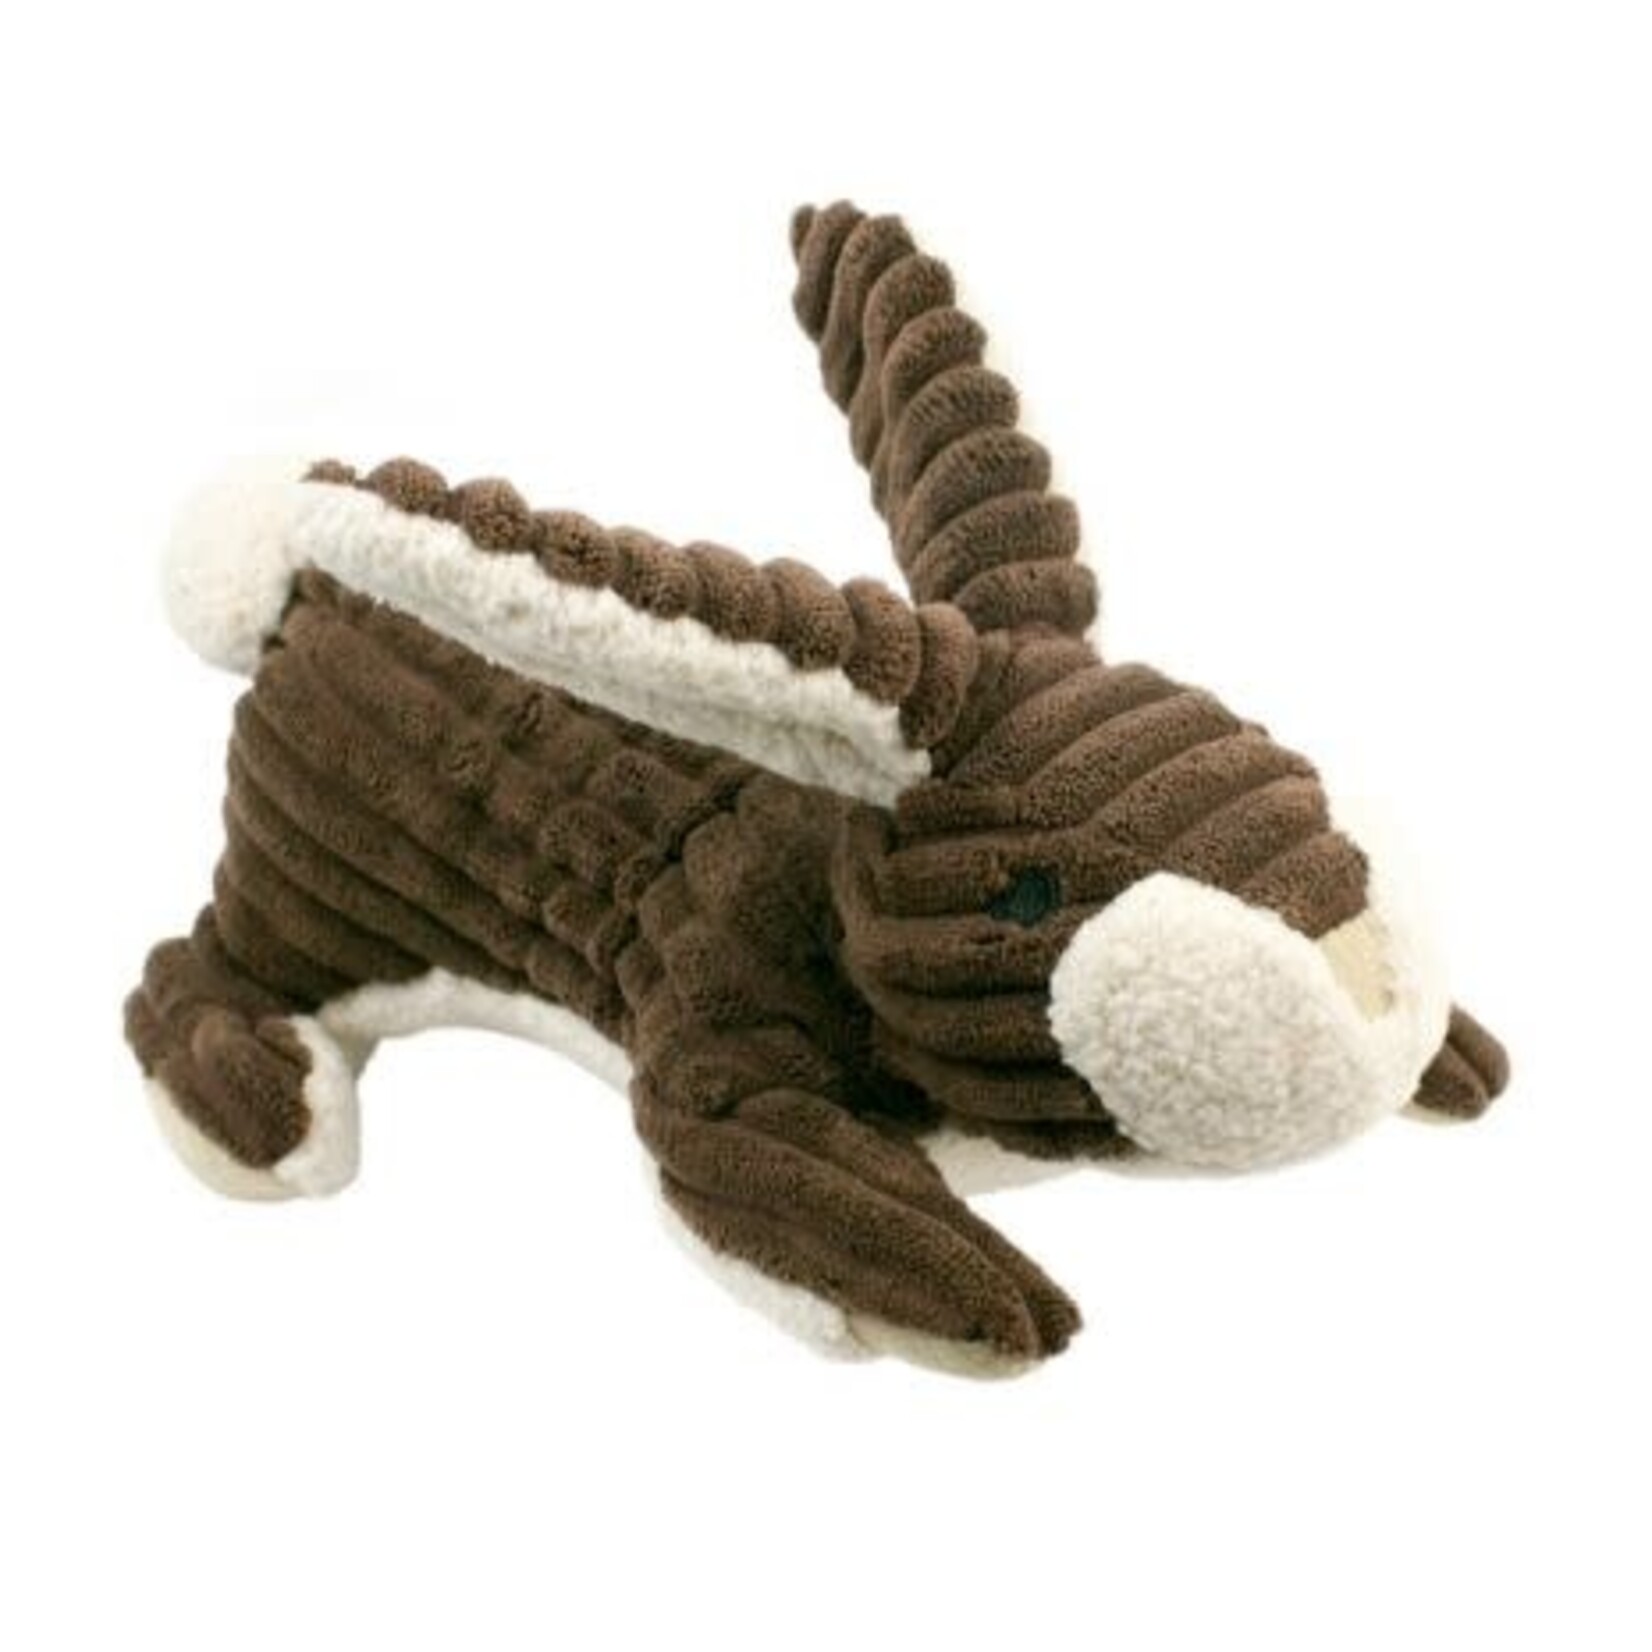 Tall Tails Tall Tails 9"Plush Rabbit Squeaker Toy